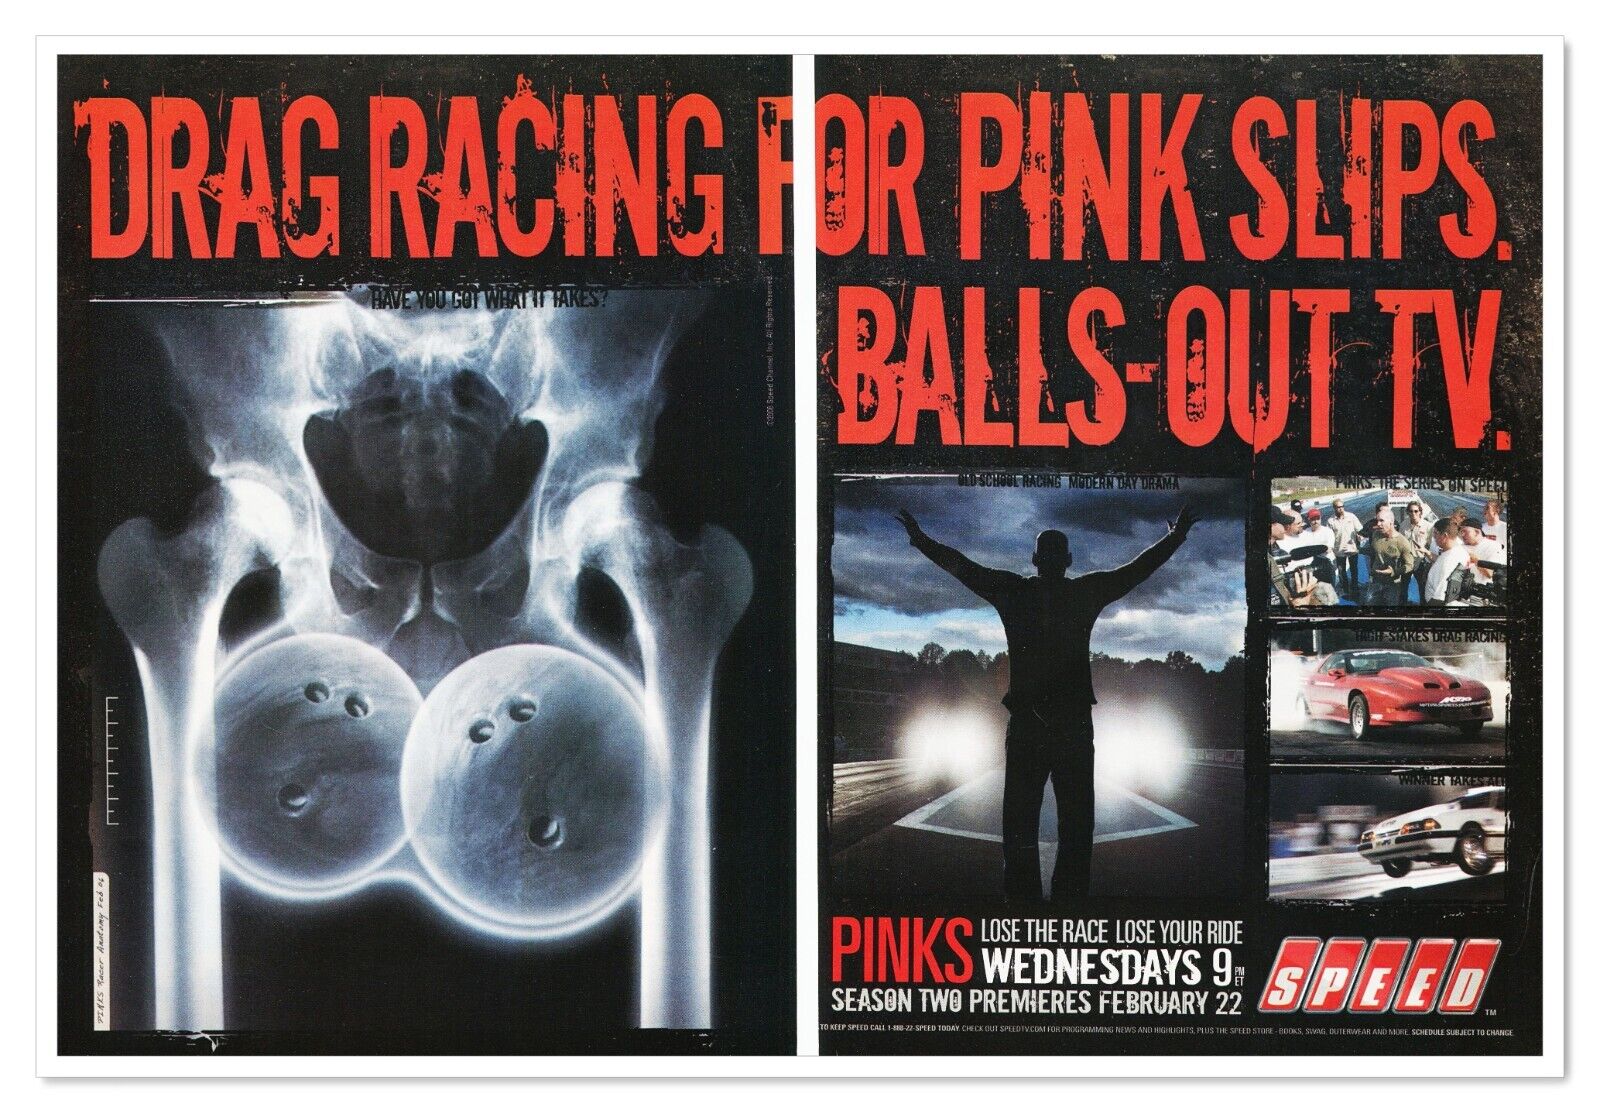 Pinks Season 2 Speed Channel Balls Out TV 2006 2-Page Print Magazine Ad